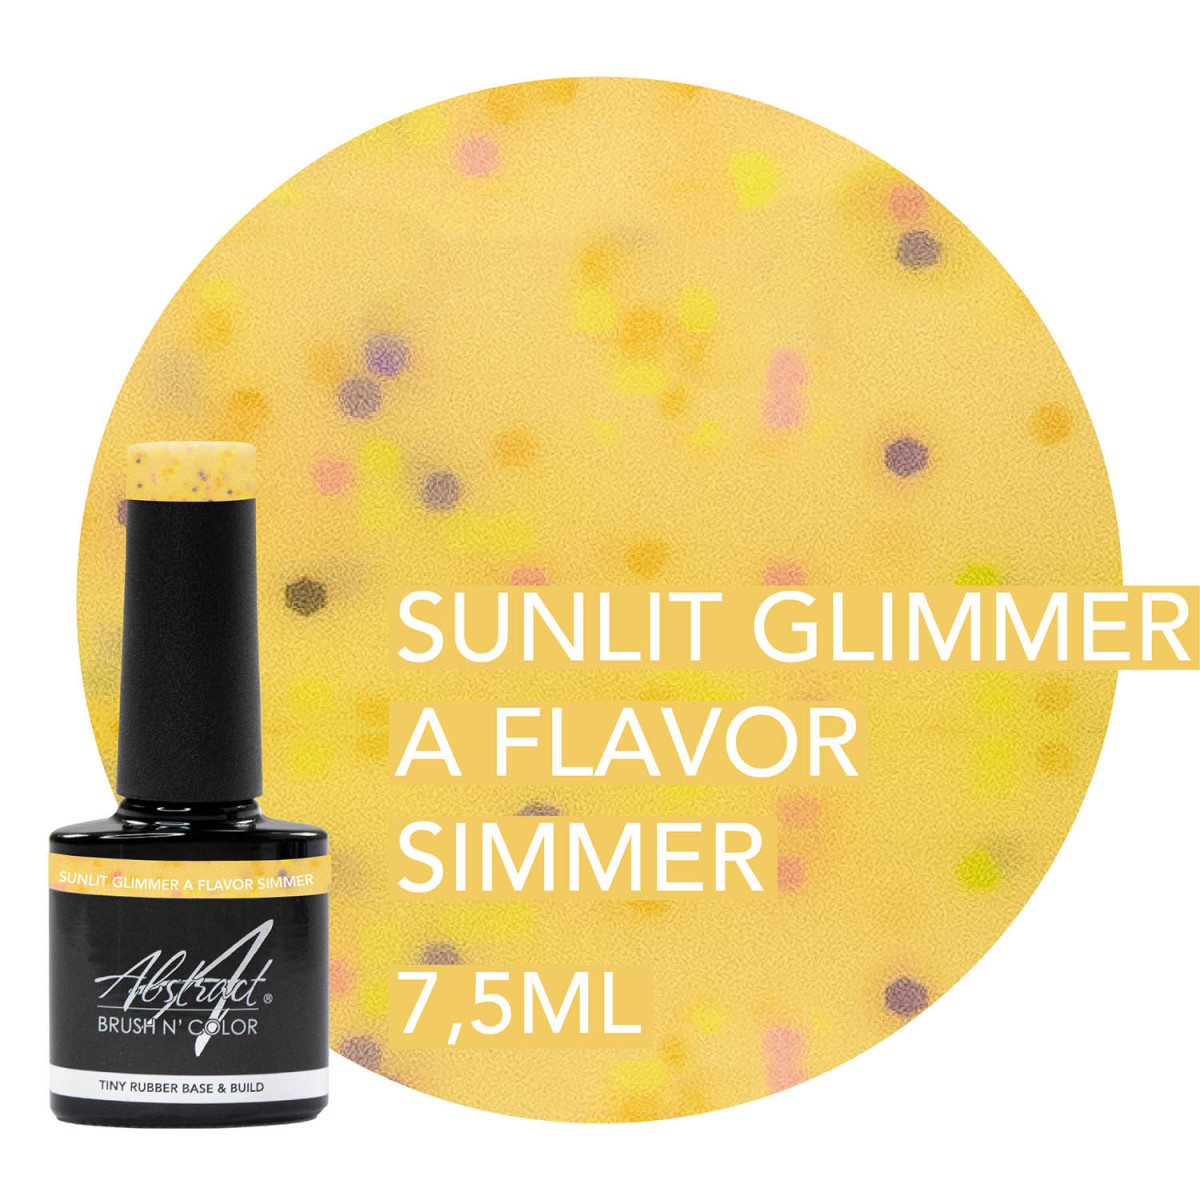 PRE-COMMANDE Sunlit Glimmer A Flavor Simmer - TINY Rubber Base & Build Gel Abstract